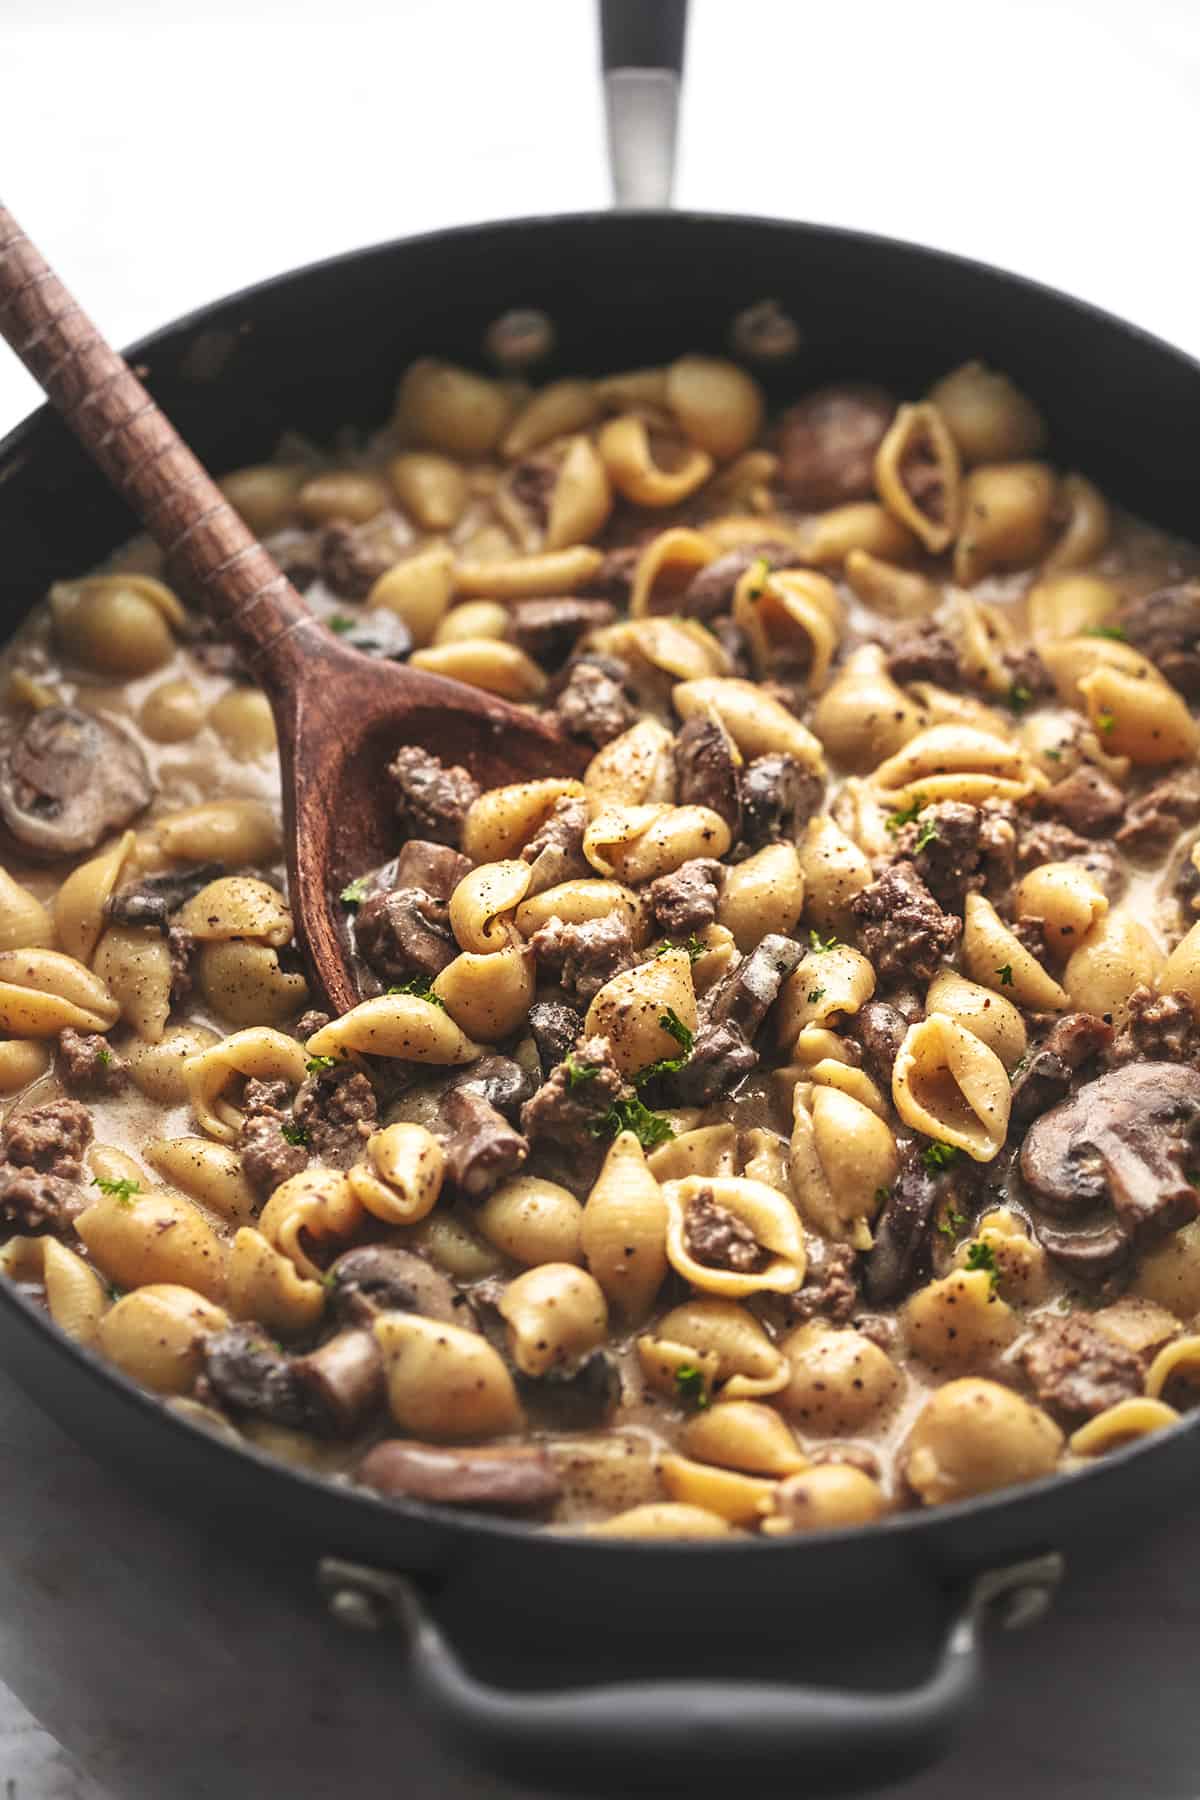 45 degree angle view of skillet filled with pasta shells with ground meat with wooden spoon